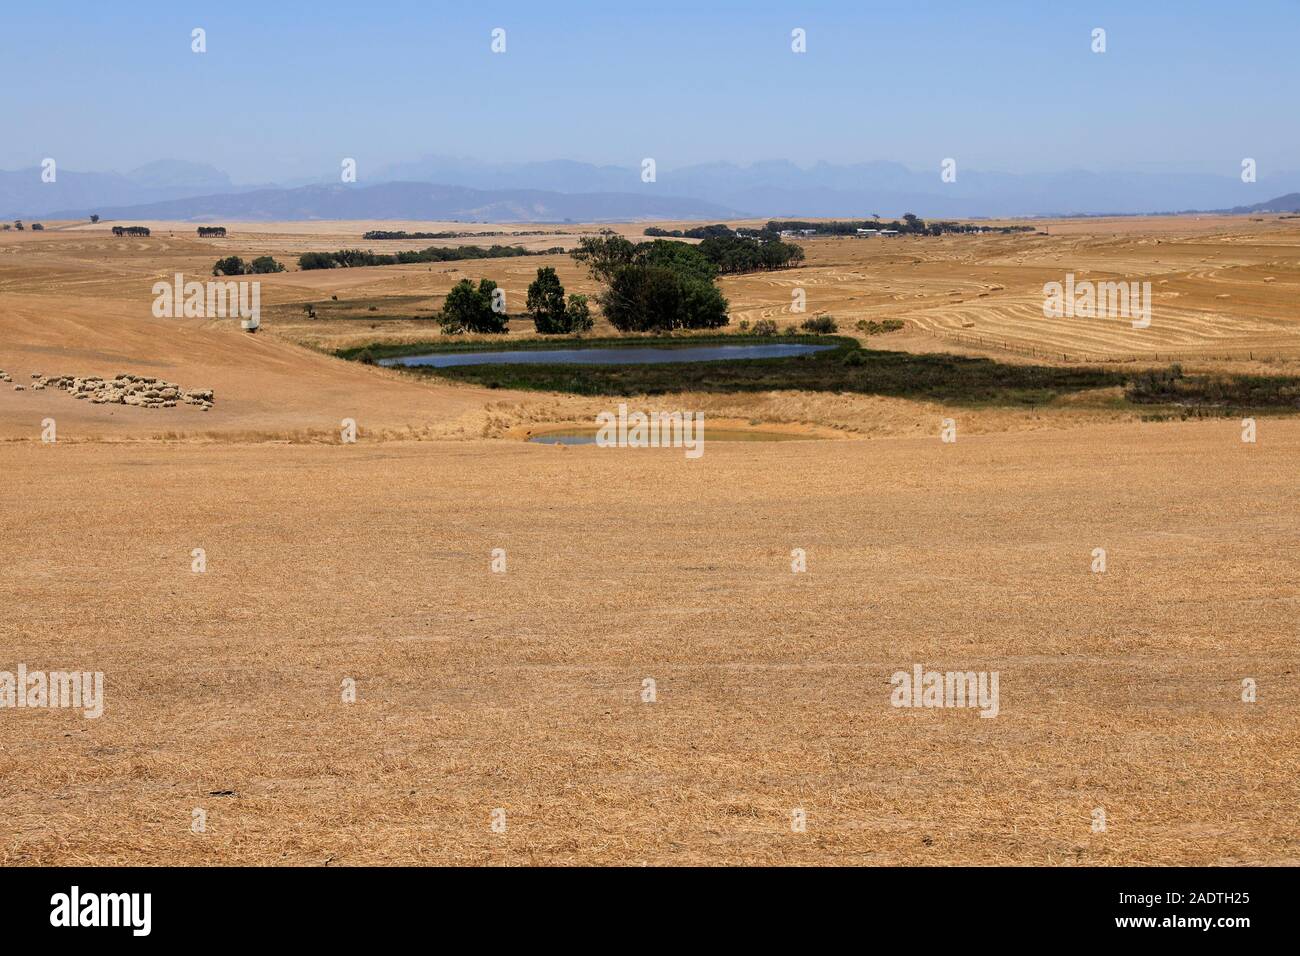 Farm in the wheat-producing Swartland region of the. Western Cape Province of South Africa Stock Photo